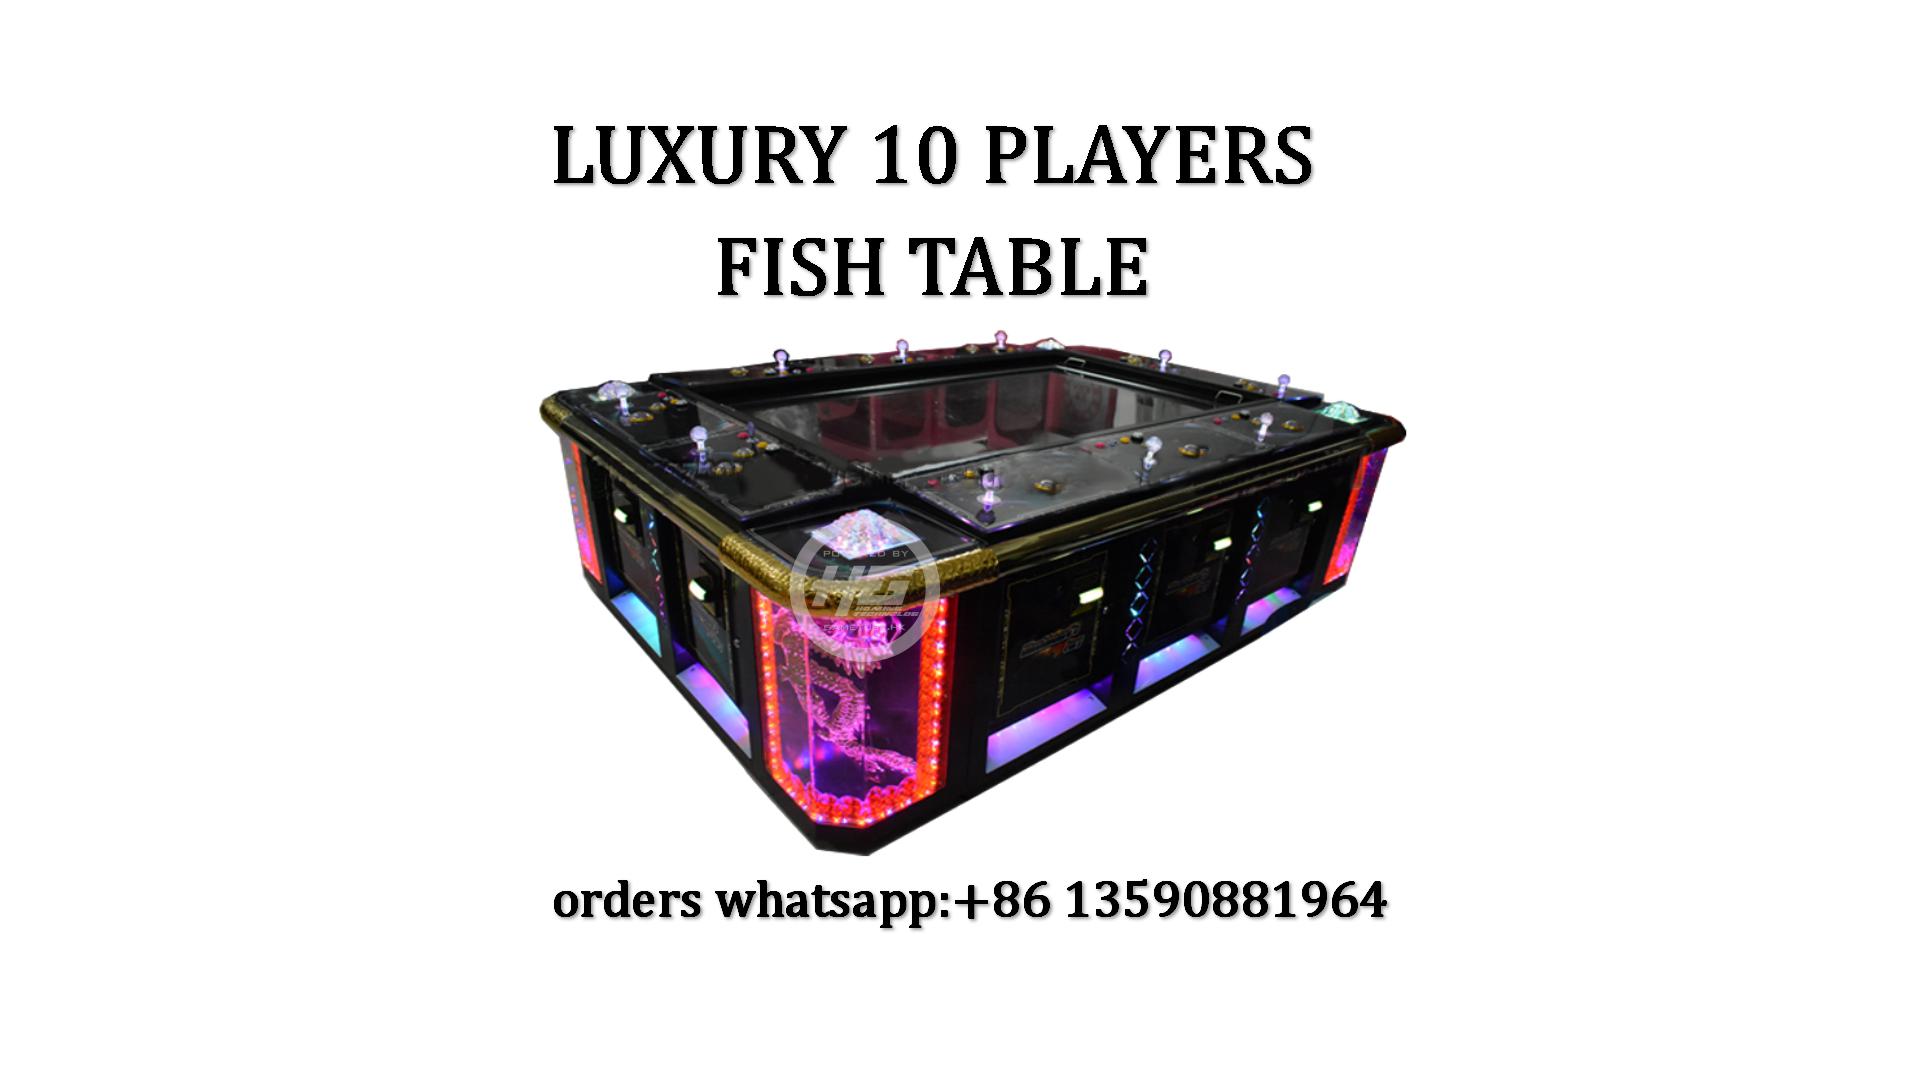 10 players fish table,10 players fish cabinet,10 players fish game,10 players fishing game,new fish table,new fish cabinet,10 players fish table,8 players fish table,fish workshop,adult fish arcade game,adult arcade fish room,fishing room,us fishing room,ocean king 3 plus,ocean king 3 plus fish game,ocean king 3 plus fishing game,ocean king 3 fishing game,ocean king 3 plus buffalo thunder,ocean king 3 plus raging fire,igs,igs ocean king 3 plus,igs,igs fishing game,igs fish game,sweeptakes,adult arcade game room,fish game room,adult fishing game room,fishing arcade game room,arcade fish game room,adult arcade fishing,indoor fishing game room,fish game room,fish gambling room,adult game room,fish game board,fishing game board,fishing kit,fish kit,ocean king 4,ocean king 4 fishing game,ocean king 4 plus,ocean king 2 fishing game,ocean monster fishing game,igs ocean king,igs original fishing game,kong fishing game,2 players fishing game,3 players fishing game,6 players fishing game,8 players fishing game,10 players fishing game,fish game machine,fishing game machine,fish table game,fishing hunter game machine,fish casino machine,fishing gambling machine,fish skill game machine,fish hunter game machine,fishing kits,fishing parts,fishing program,original fishing game,ocean king fishing game,taiwan fishing game,usa fishing game,hot fishing game,new fishing game,newest fishing game,indoor fishing game,shooting fishing game,arcade fishing table,online fishing game,fish app,fishing app,mobile phone fishing game,online app,online casino app,slot game machine,slot casino machine,slot gambling machine,casino machine,gambling machine,homing game fishing game,homing game,gametube,gametube.hk,fishing game machine price,fishing game machine board,fishing shooting machine game,fishing game slot machine,fishing season game machine tips,fishing video game machine,3d fishing game machine,best fishing game machine,fishing game for android,fishing game 2020,arcade fishing game machine